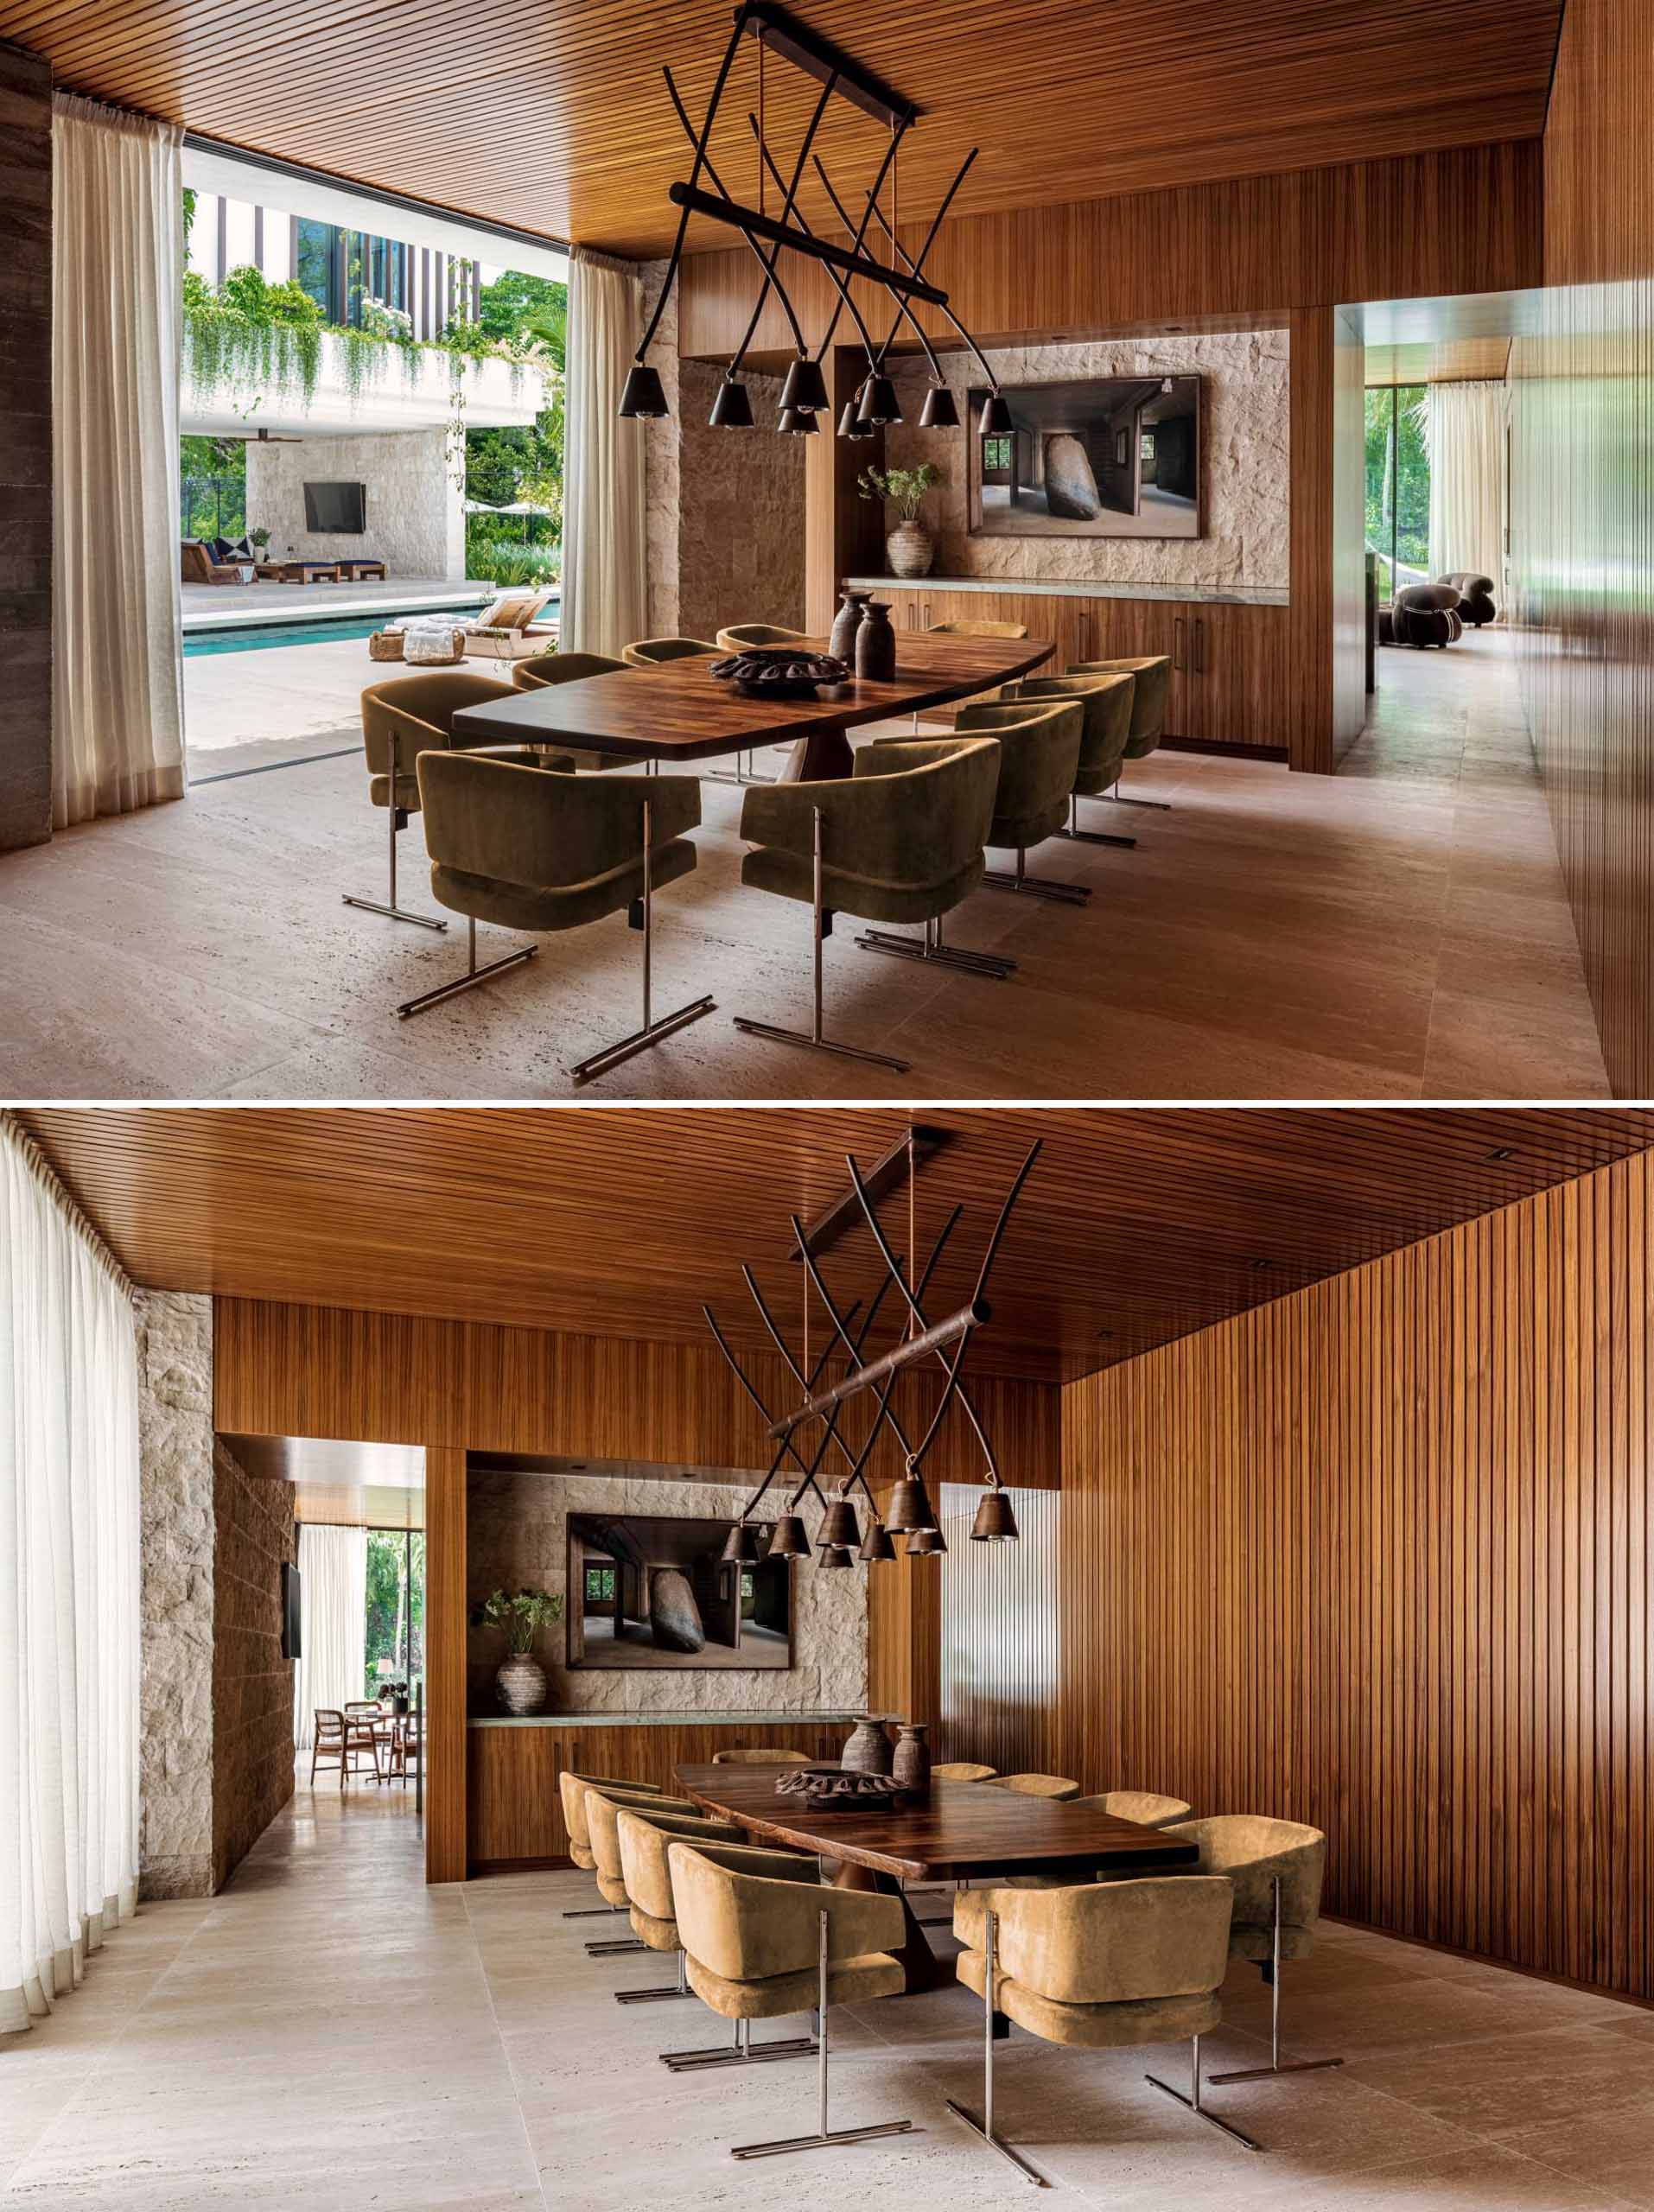 In this modern dining room, there's abundant teak paneling as well as stone accents.